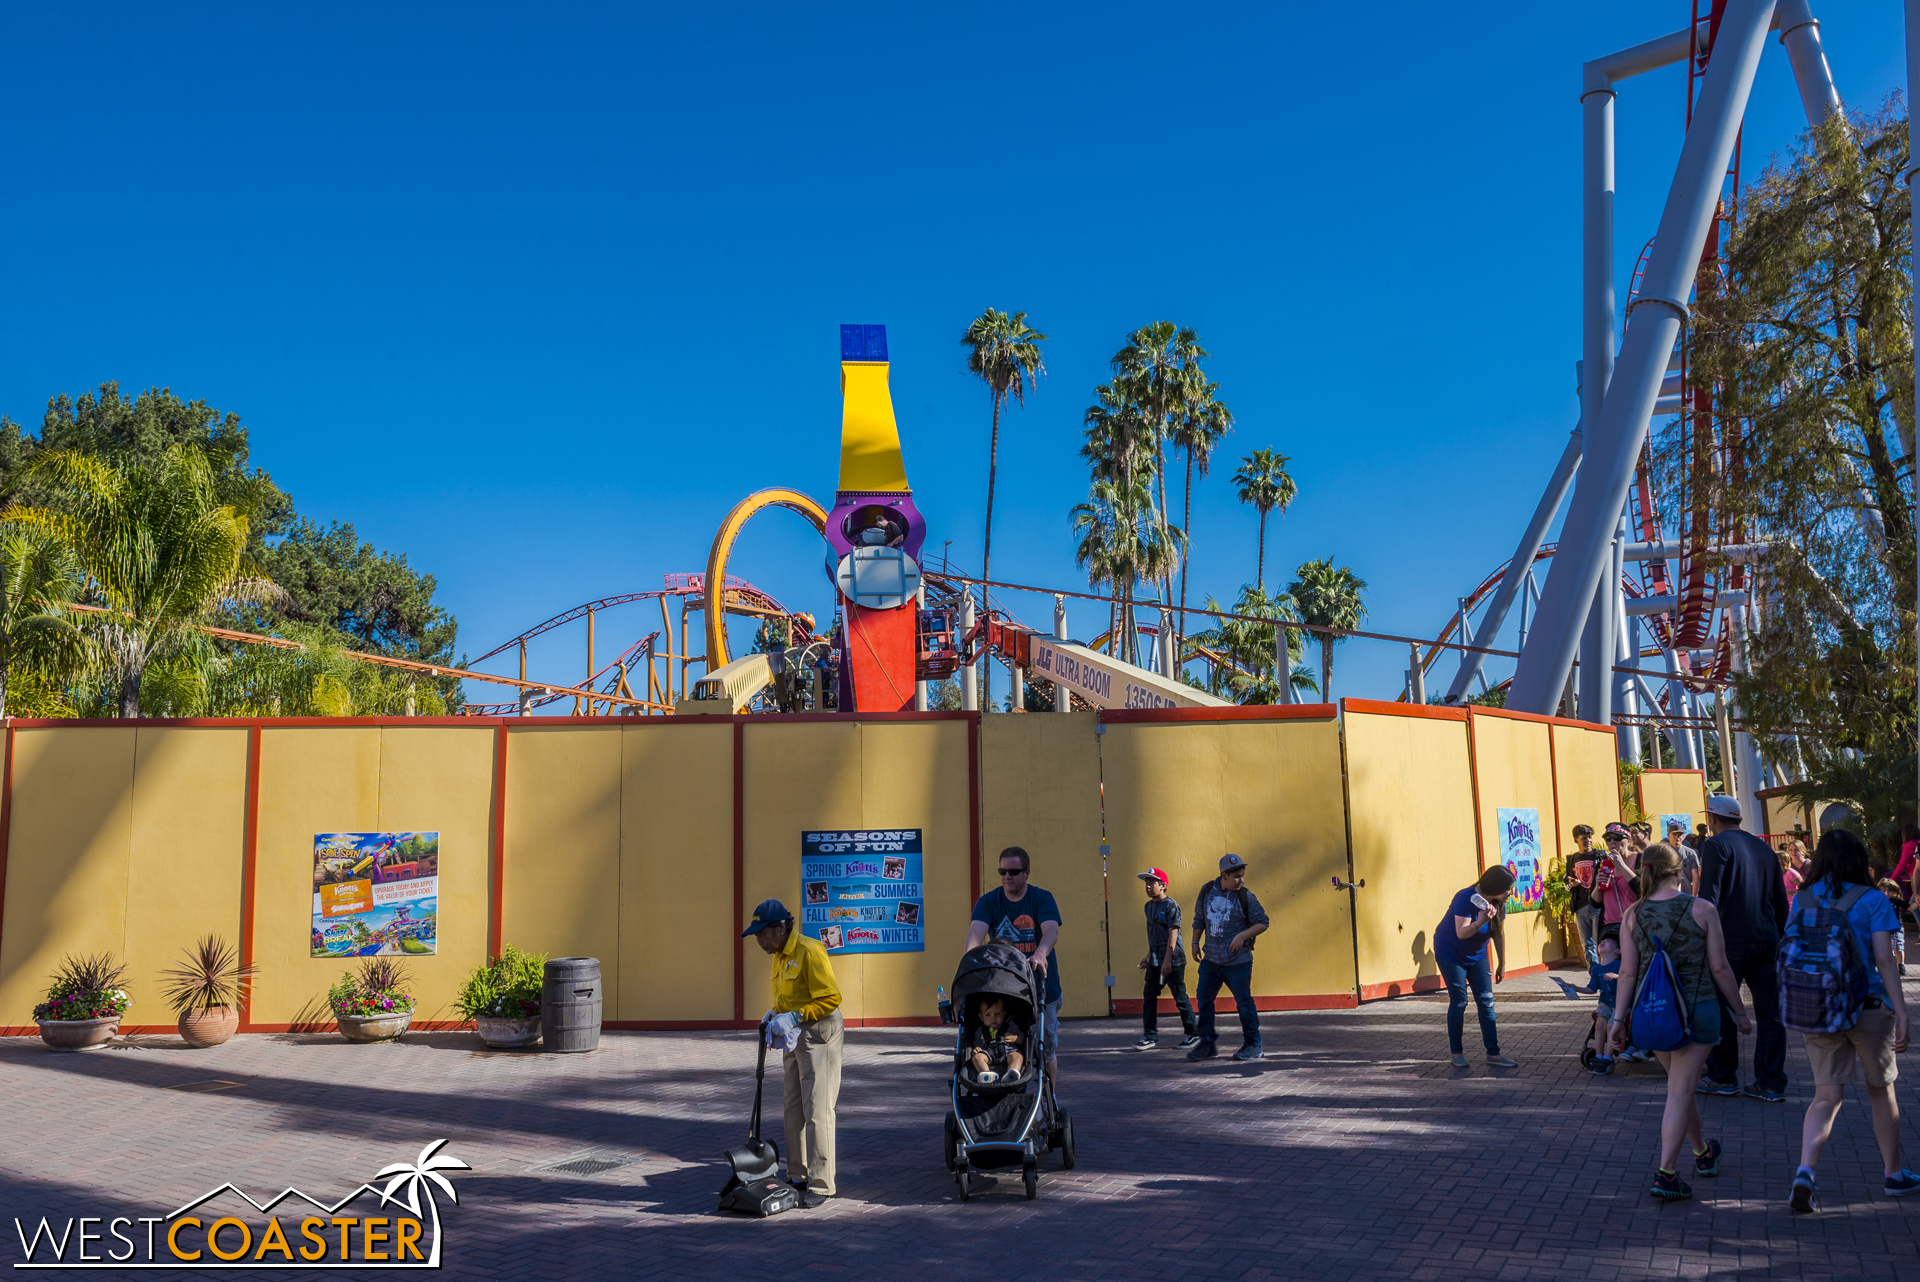  In Fiesta Village, workers were actually working on the Sol Spin attraction on a Saturday. 